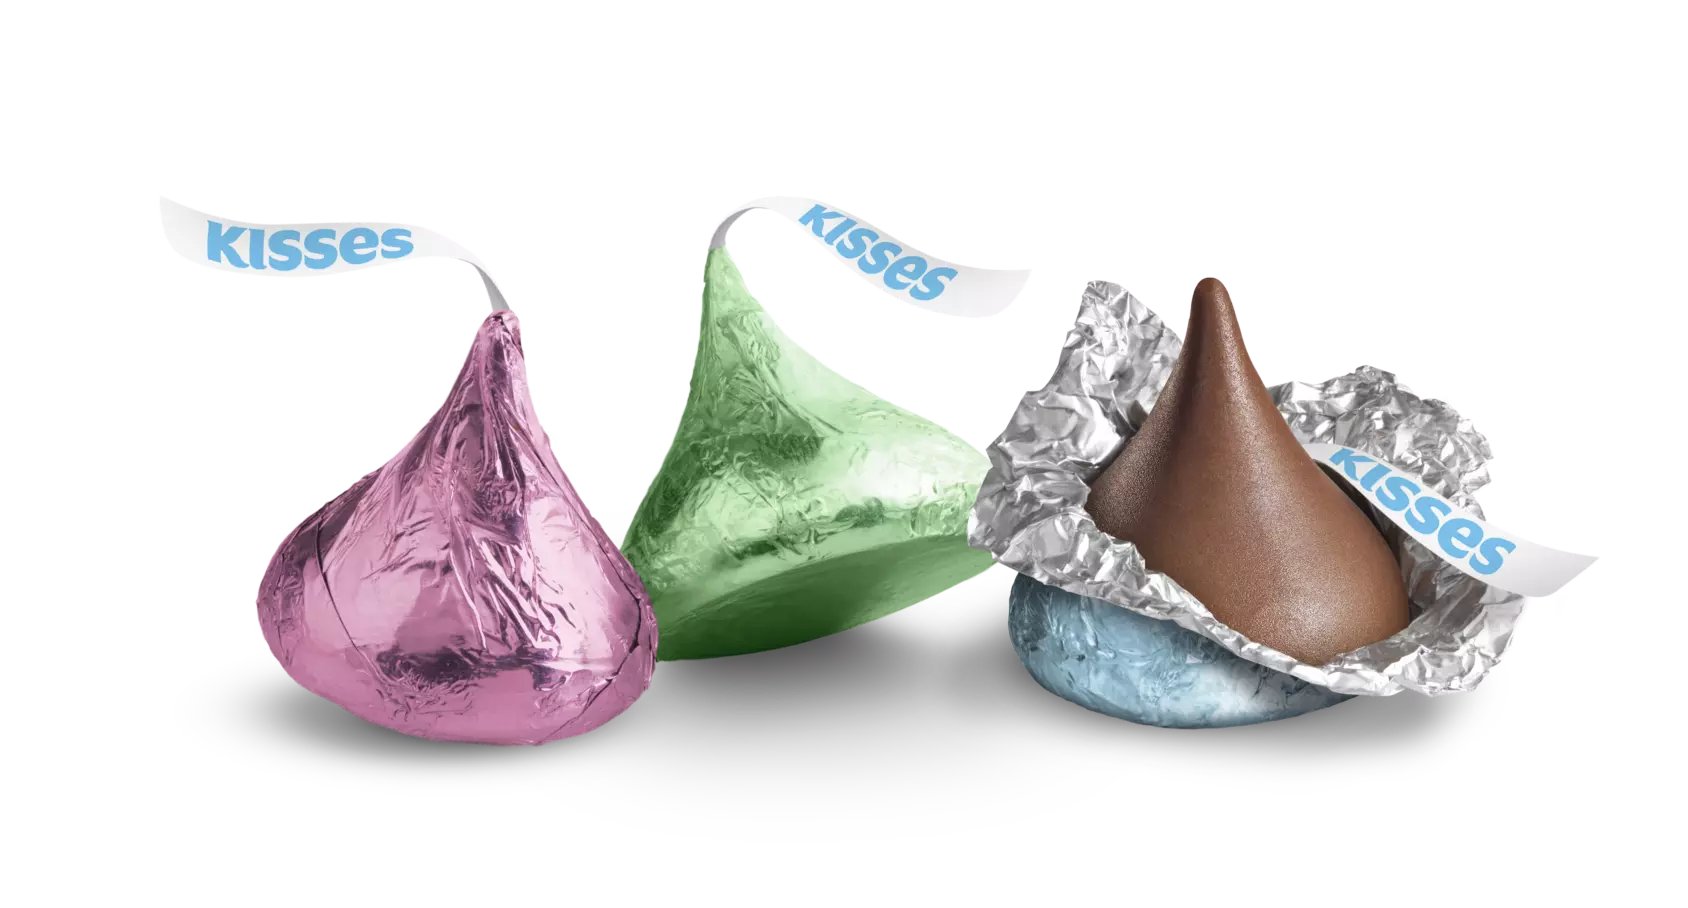 HERSHEY'S KISSES Easter Milk Chocolate Candy, 17 oz bag - Out of Package